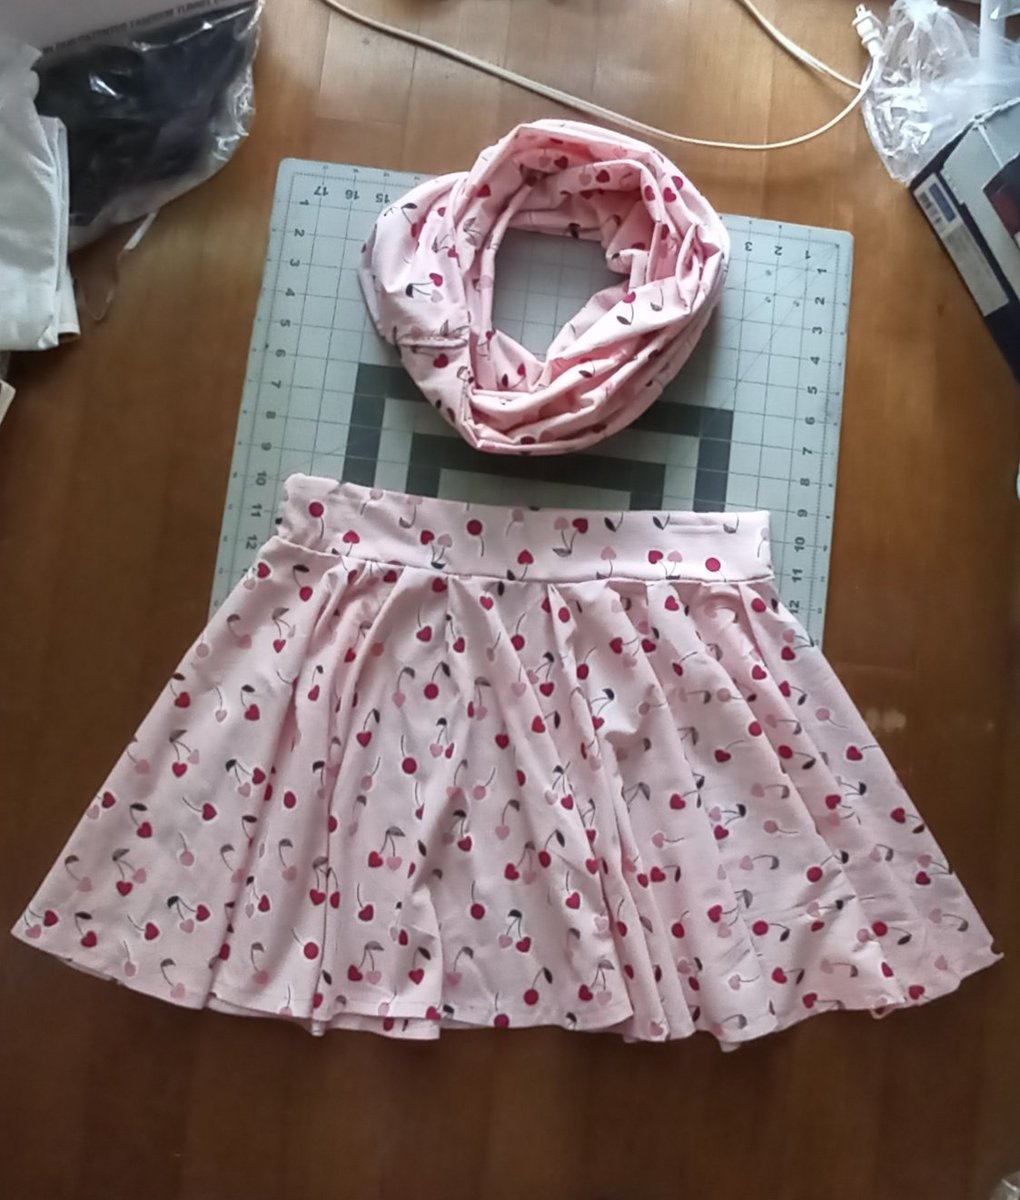 Made a skirt and circle scarf for fun! #handmadewithjoann